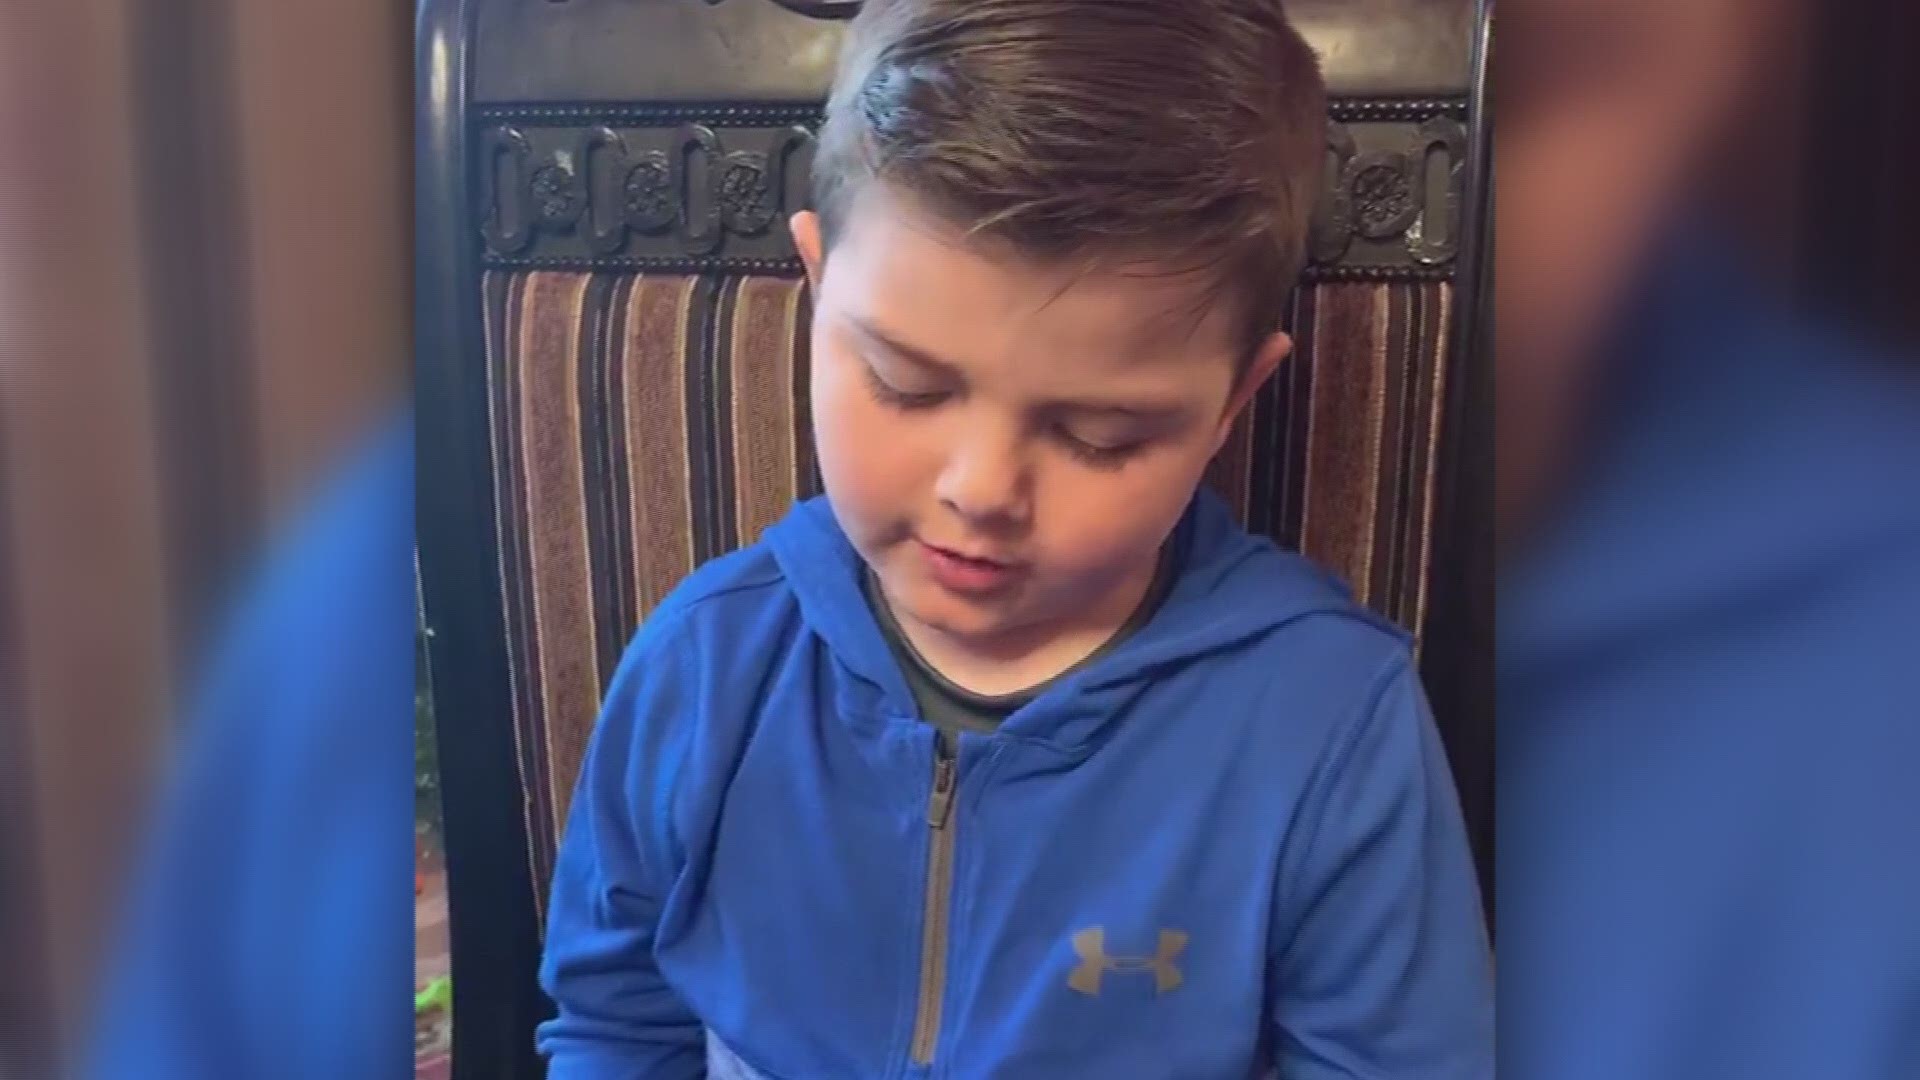 Noah Sileno was diagnosed with leukemia back in 2018. Daily chemotherapy treatments have weakened his immune system, so he's asking others to stay home too.